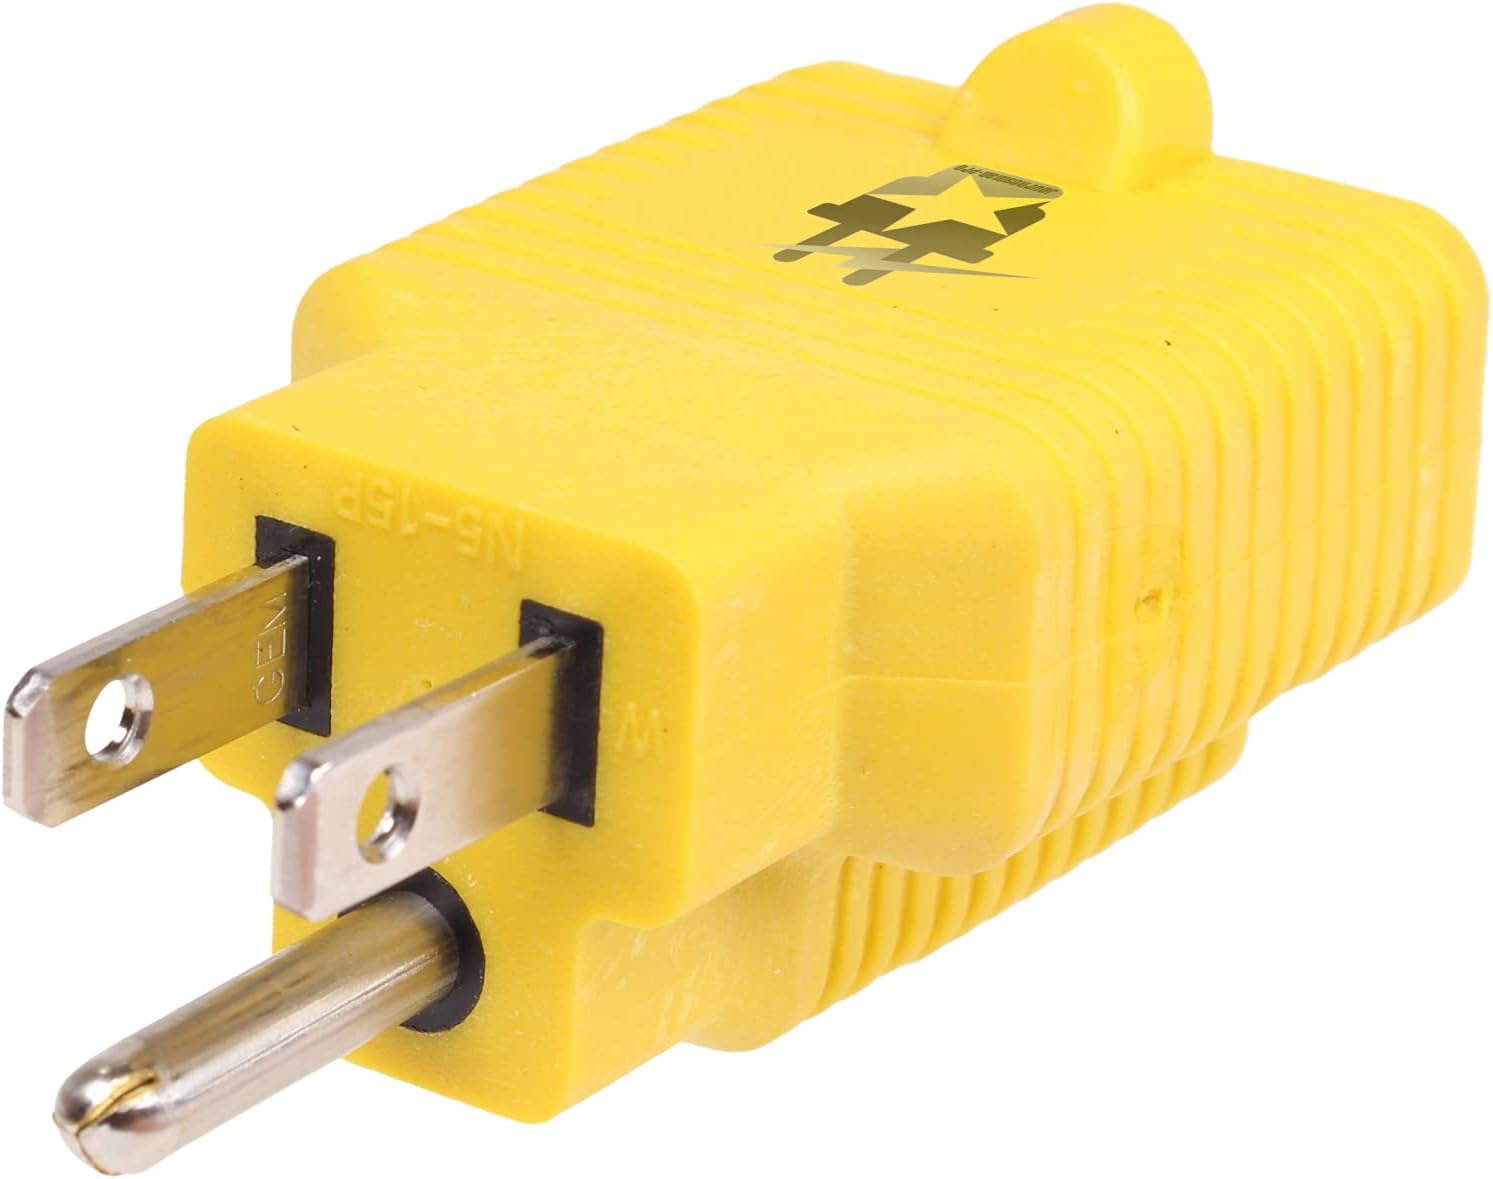 4 In 1 Female T-Blade Adapter 15 Amp Household Plug To 20 Amp, 5-15P To 5-20R,6-15R,6-20R - 15A To 20A 125V, Window Wall Outlet Adaptor. Easy To See Yellow. (3-PK, Yellow) - image 4 of 6